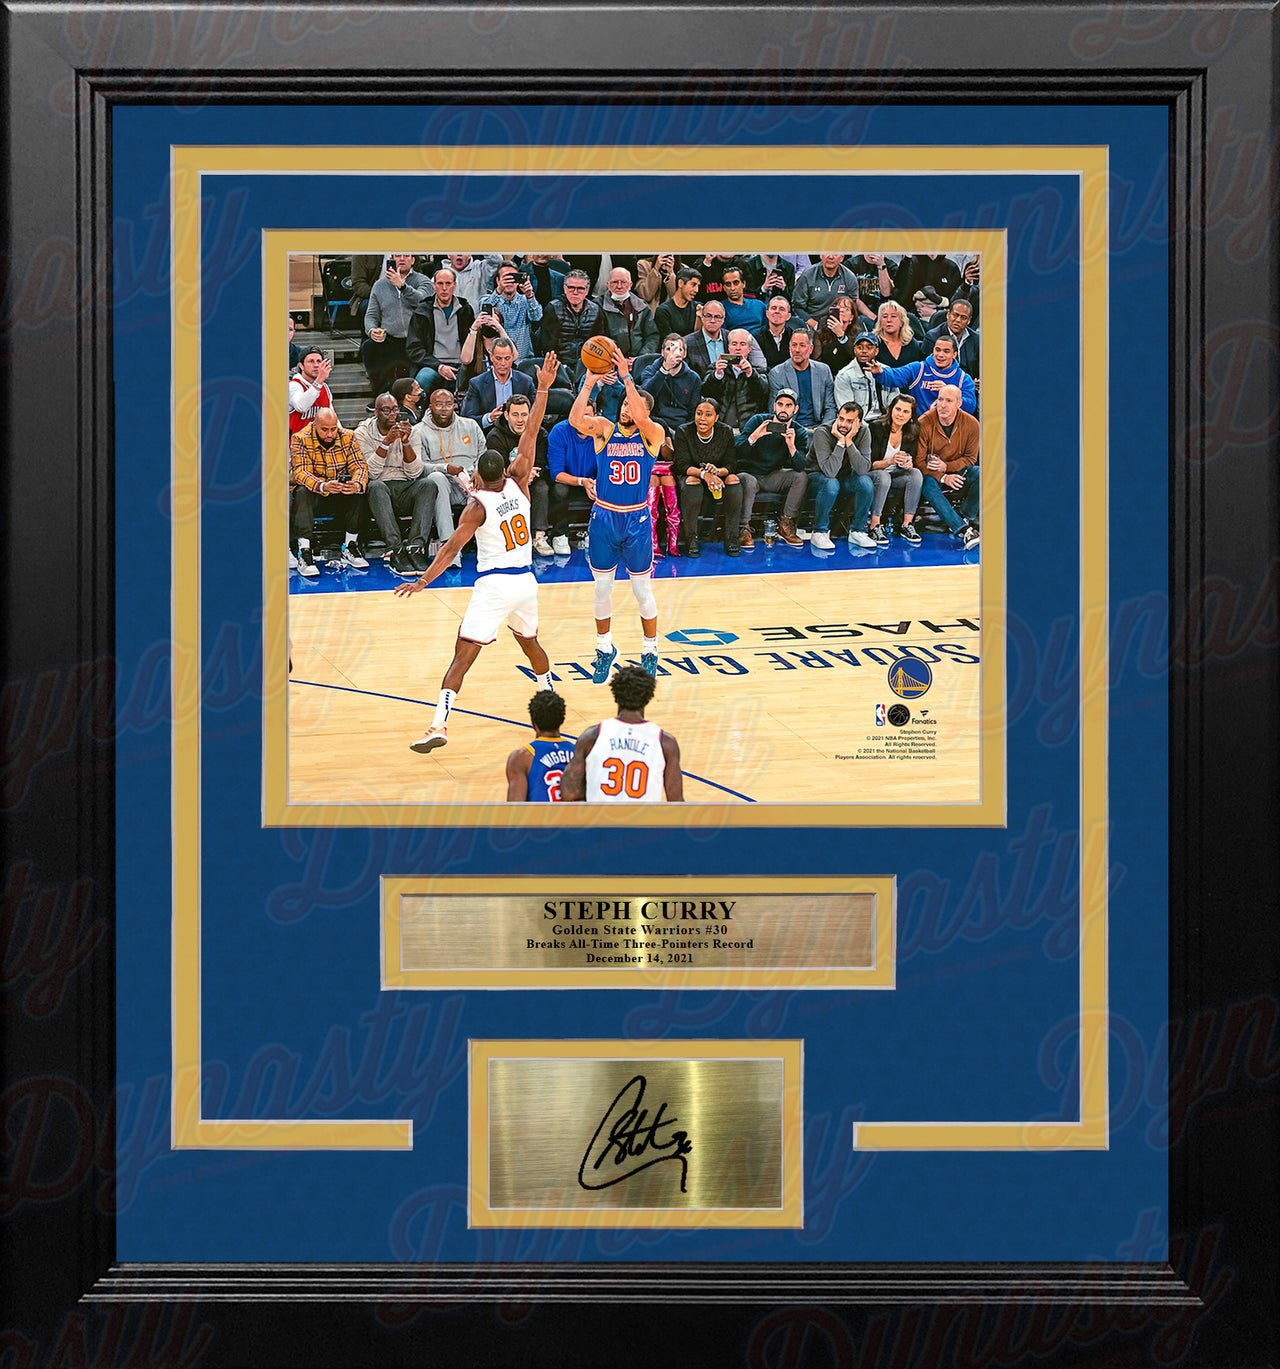 Steph Curry 3-Point Record-Breaking Shot Golden State Warriors 8" x 10" Framed Basketball Photo with Engraved Autograph - Dynasty Sports & Framing 